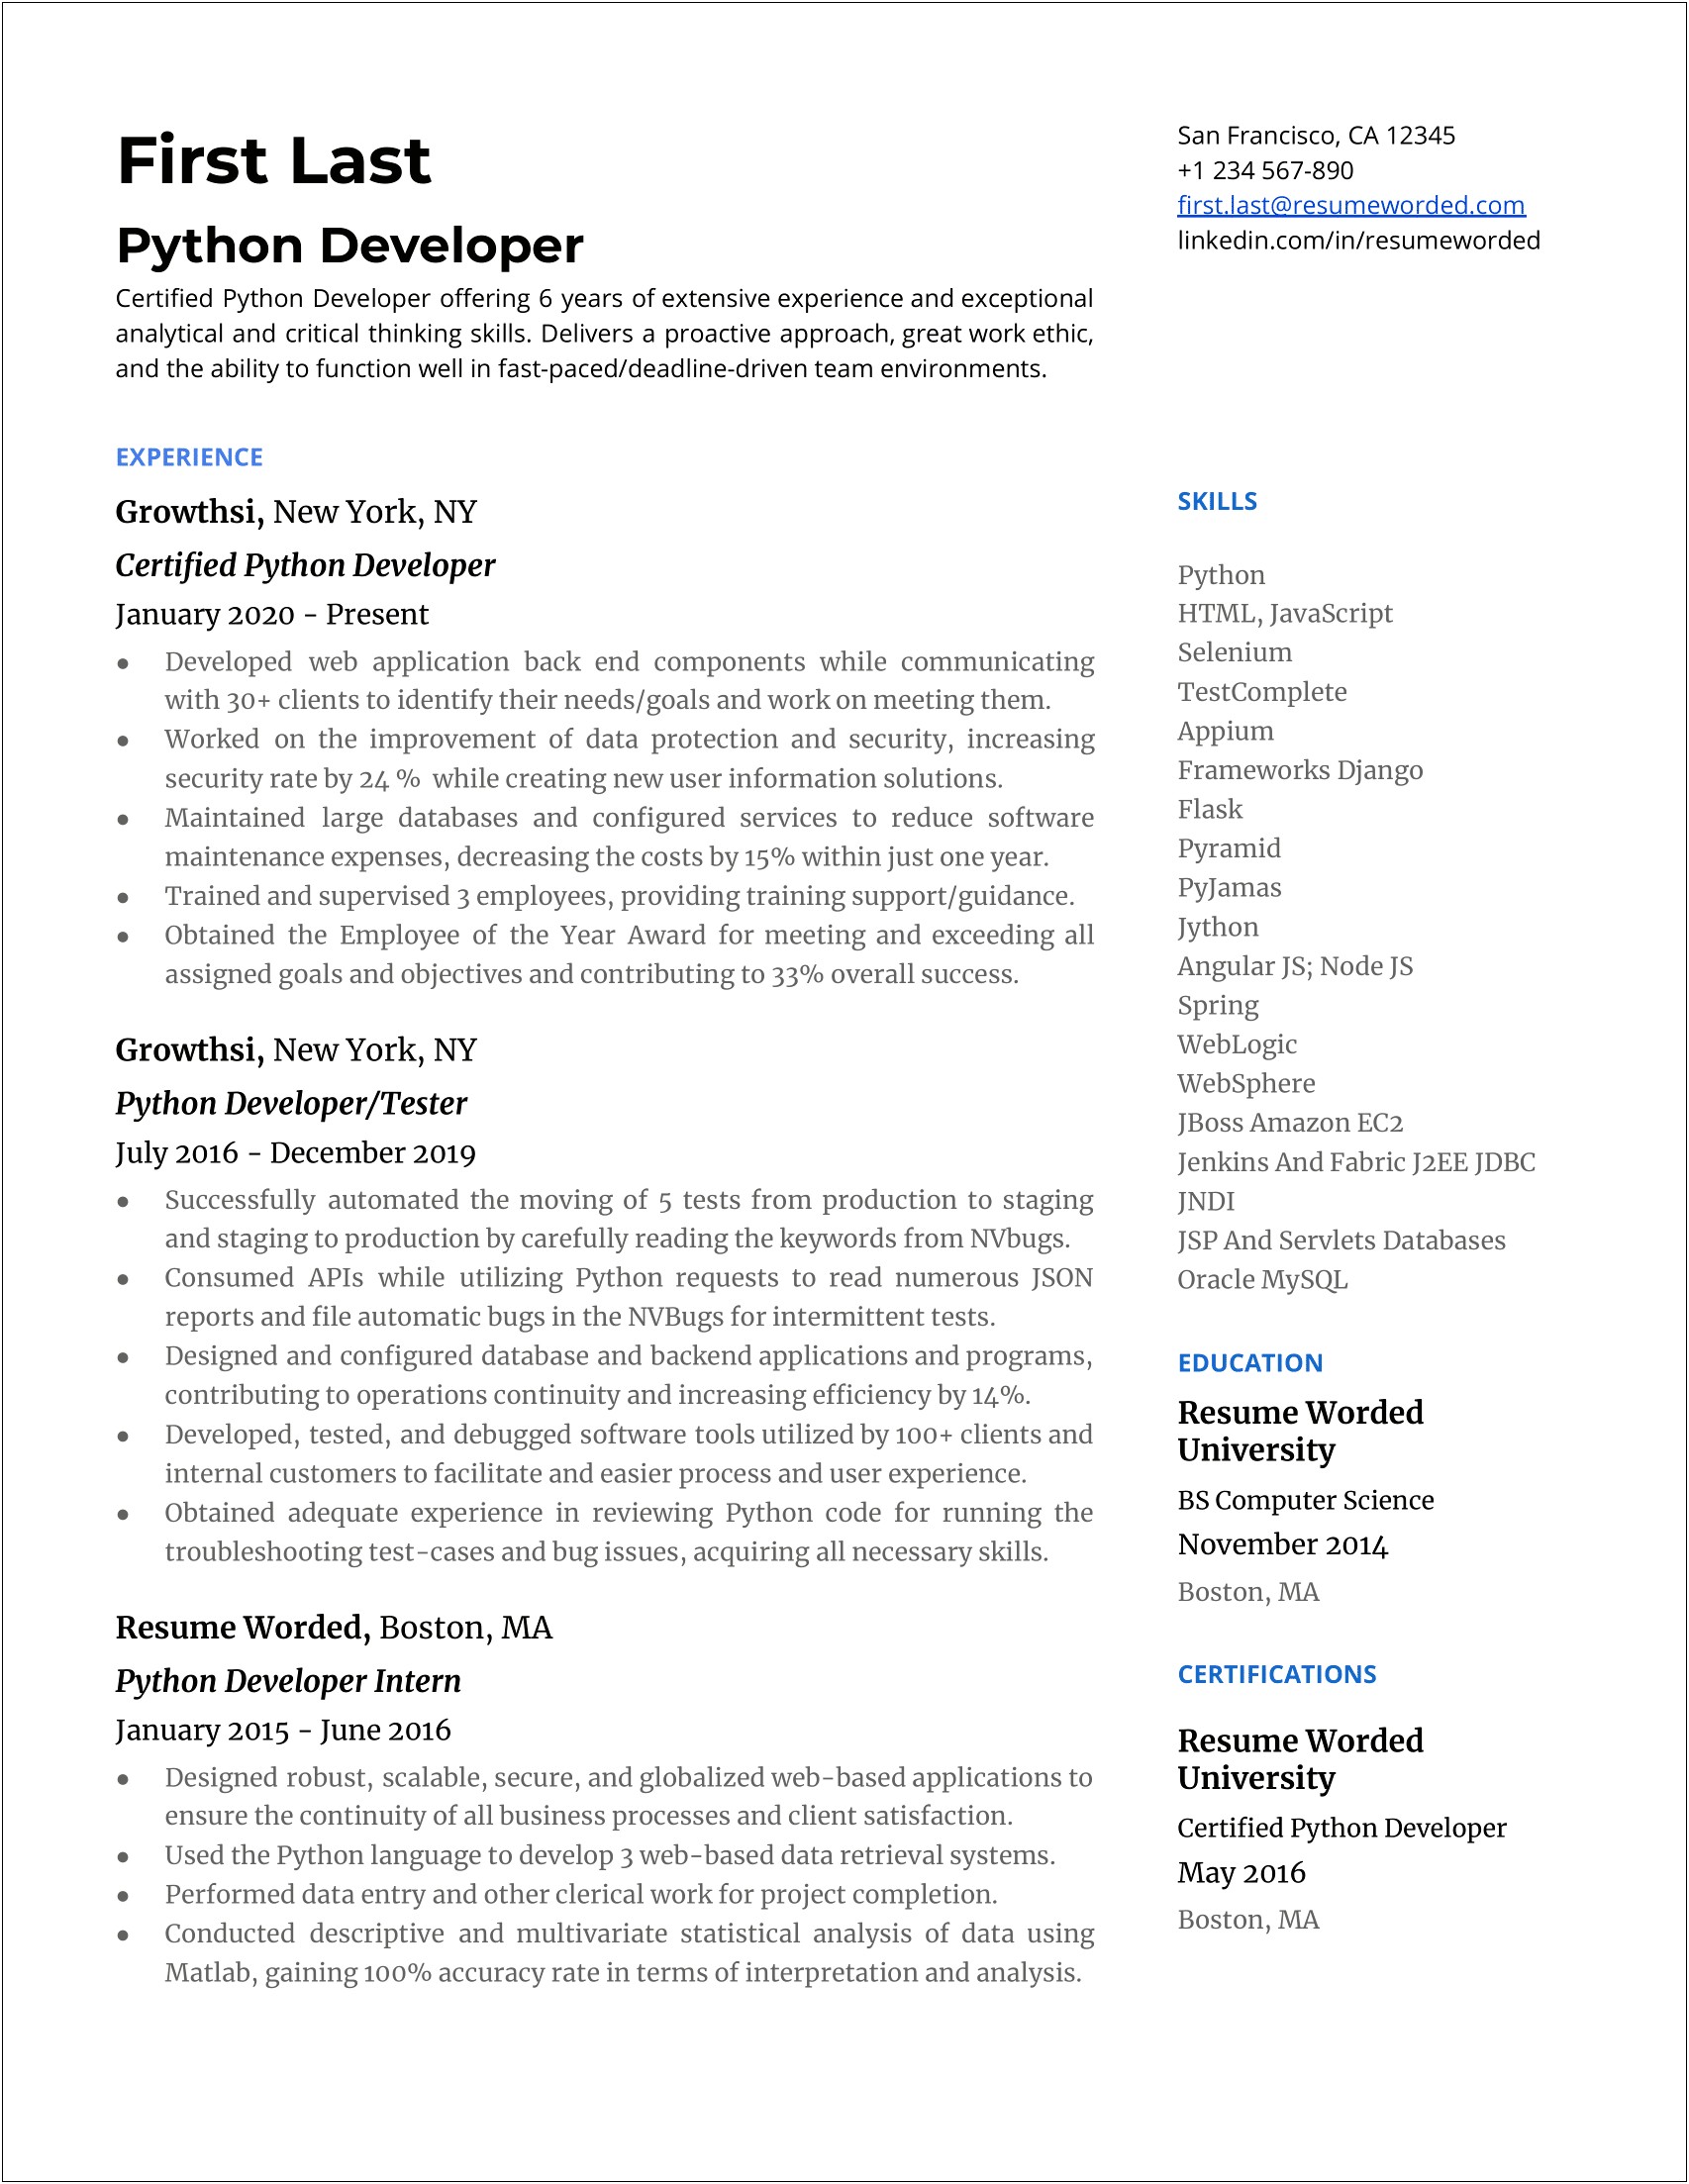 Resume Highlight Project Examples Web Dev